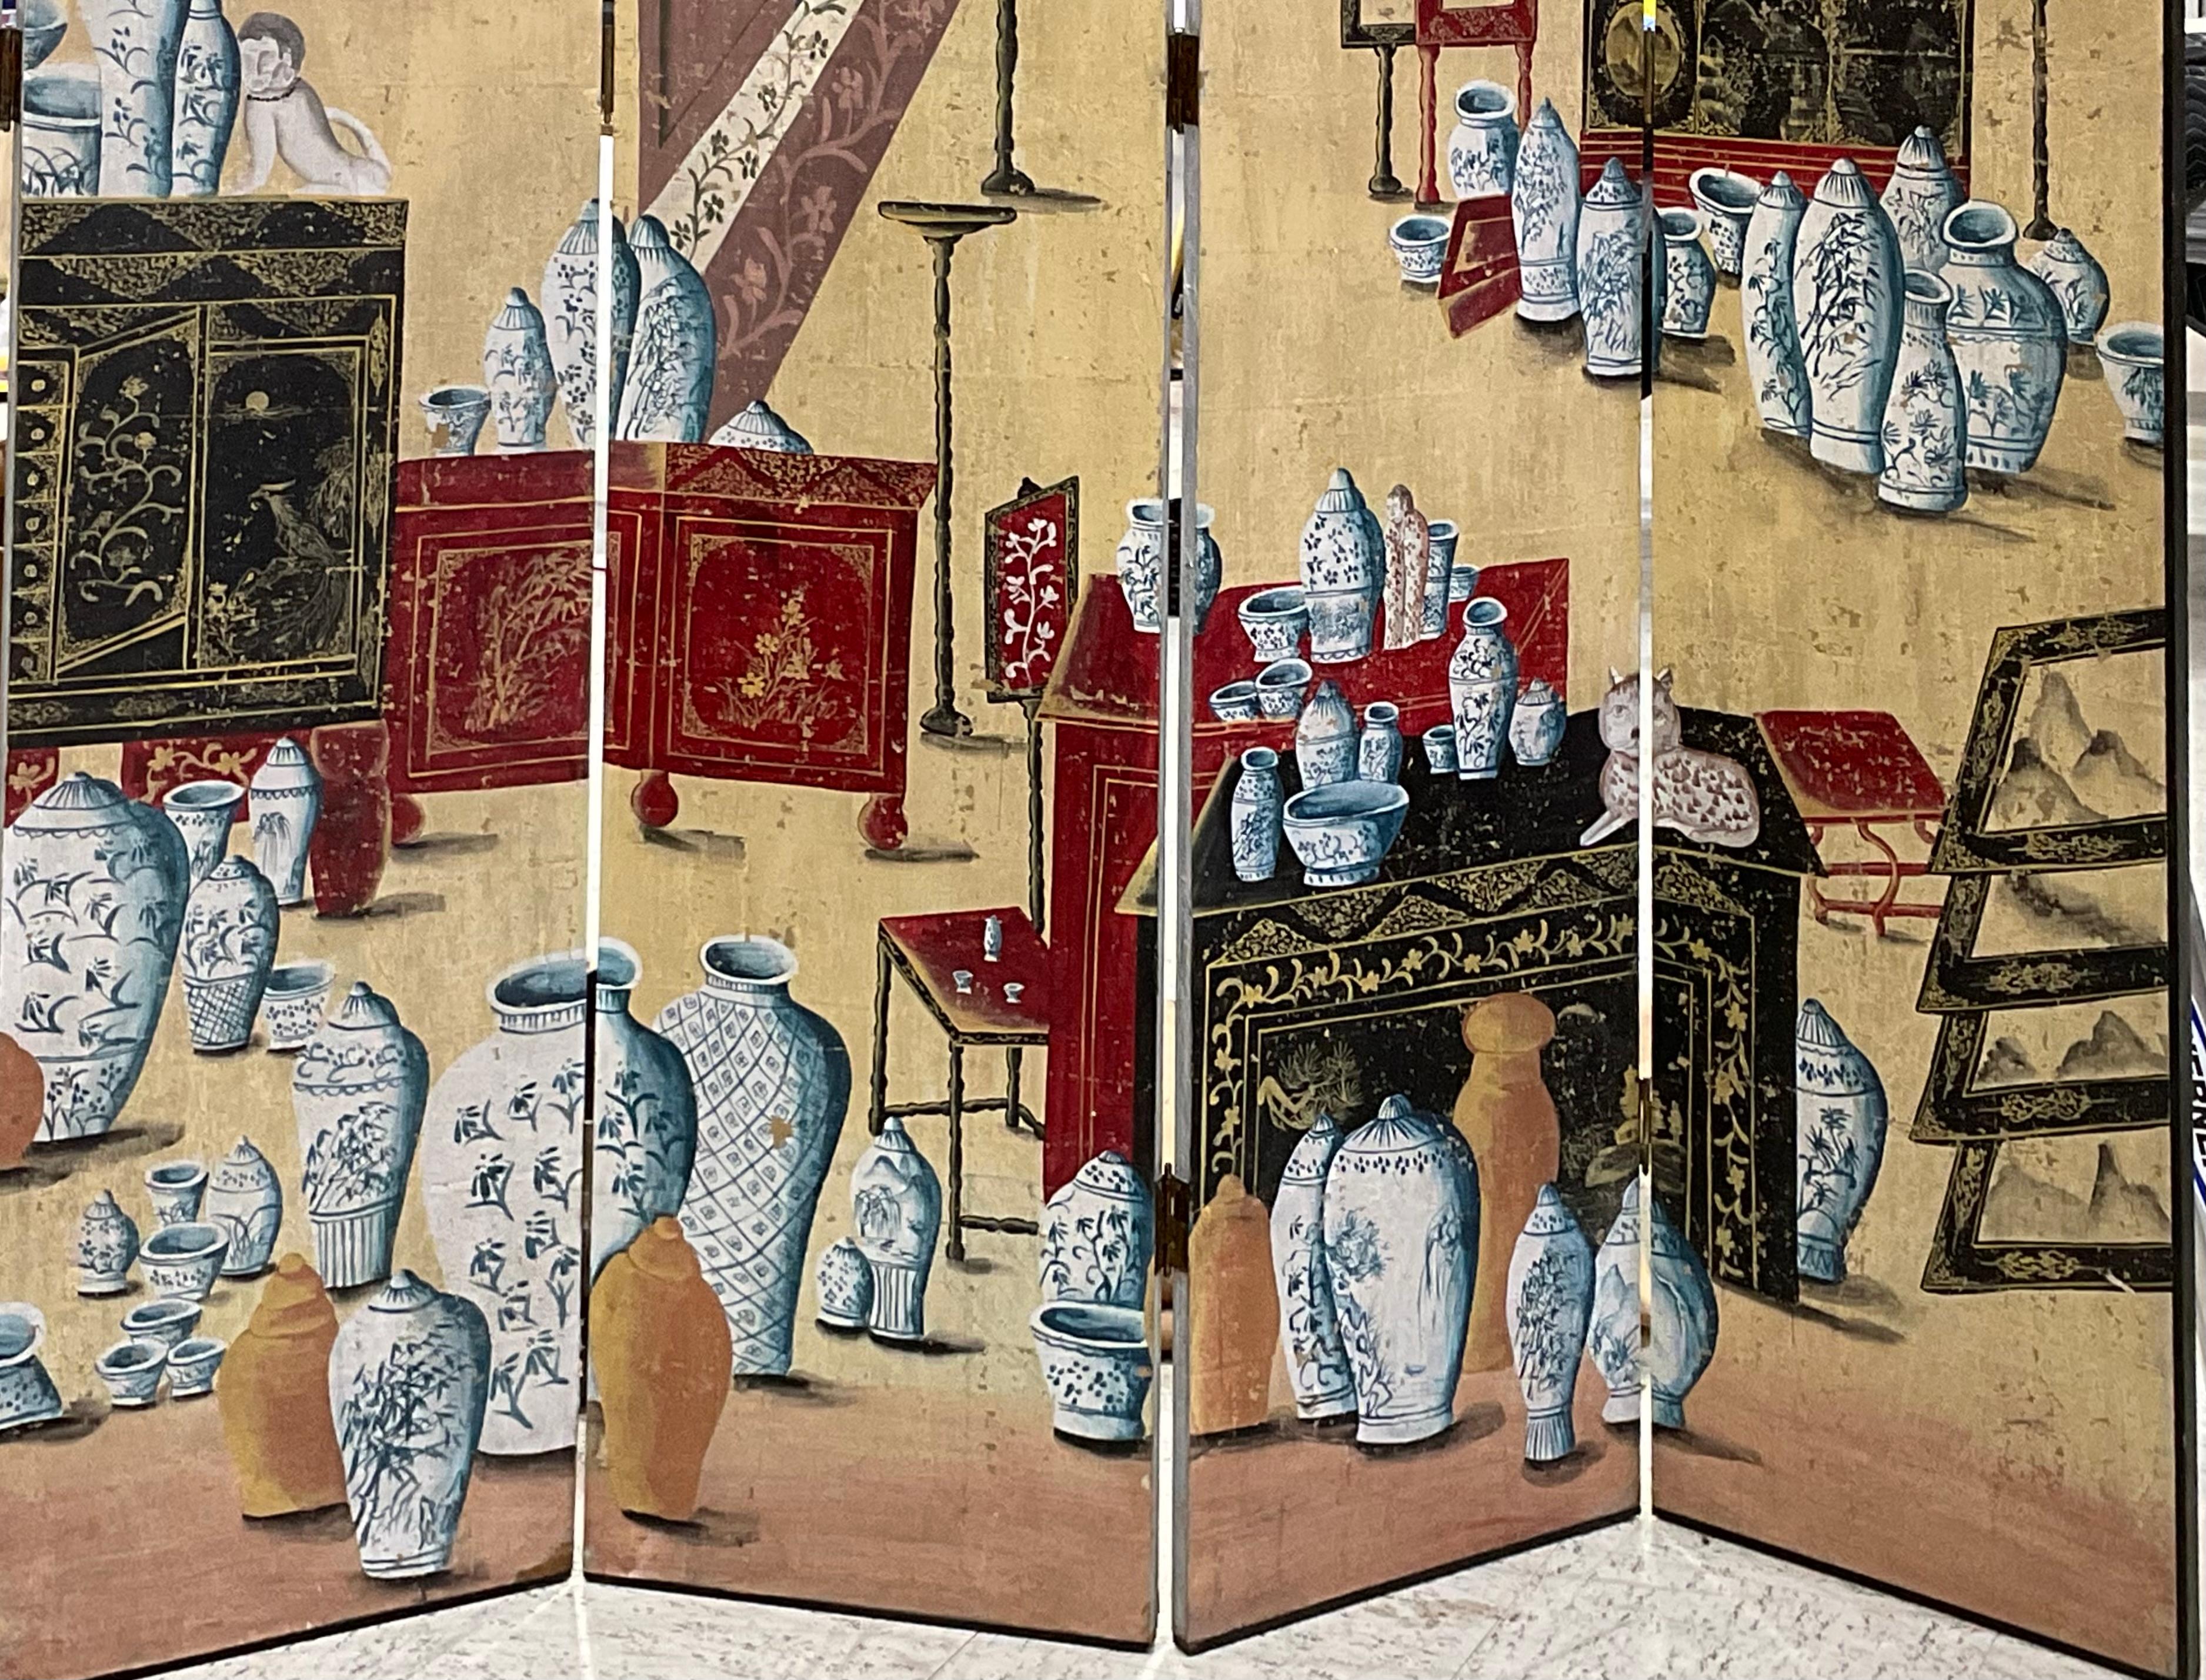 Chinese export wallpaper six panel screen, each panel depicting Chinese decor. Screen includes blue and white painted vases, urns and furnishings in colors that include blue, burgundy, mauve, gold and black against a champagne background. Each panel